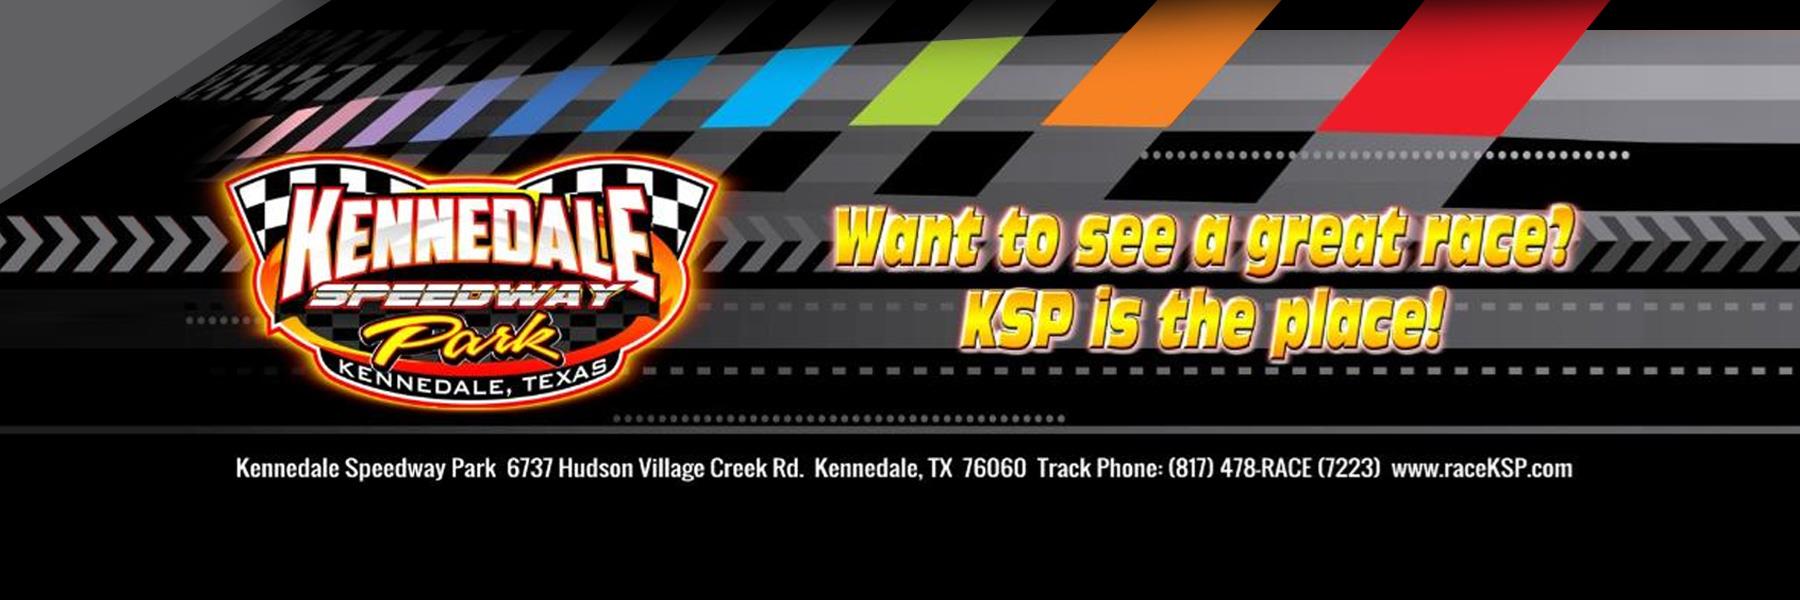 4/13/2013 - Kennedale Speedway Park